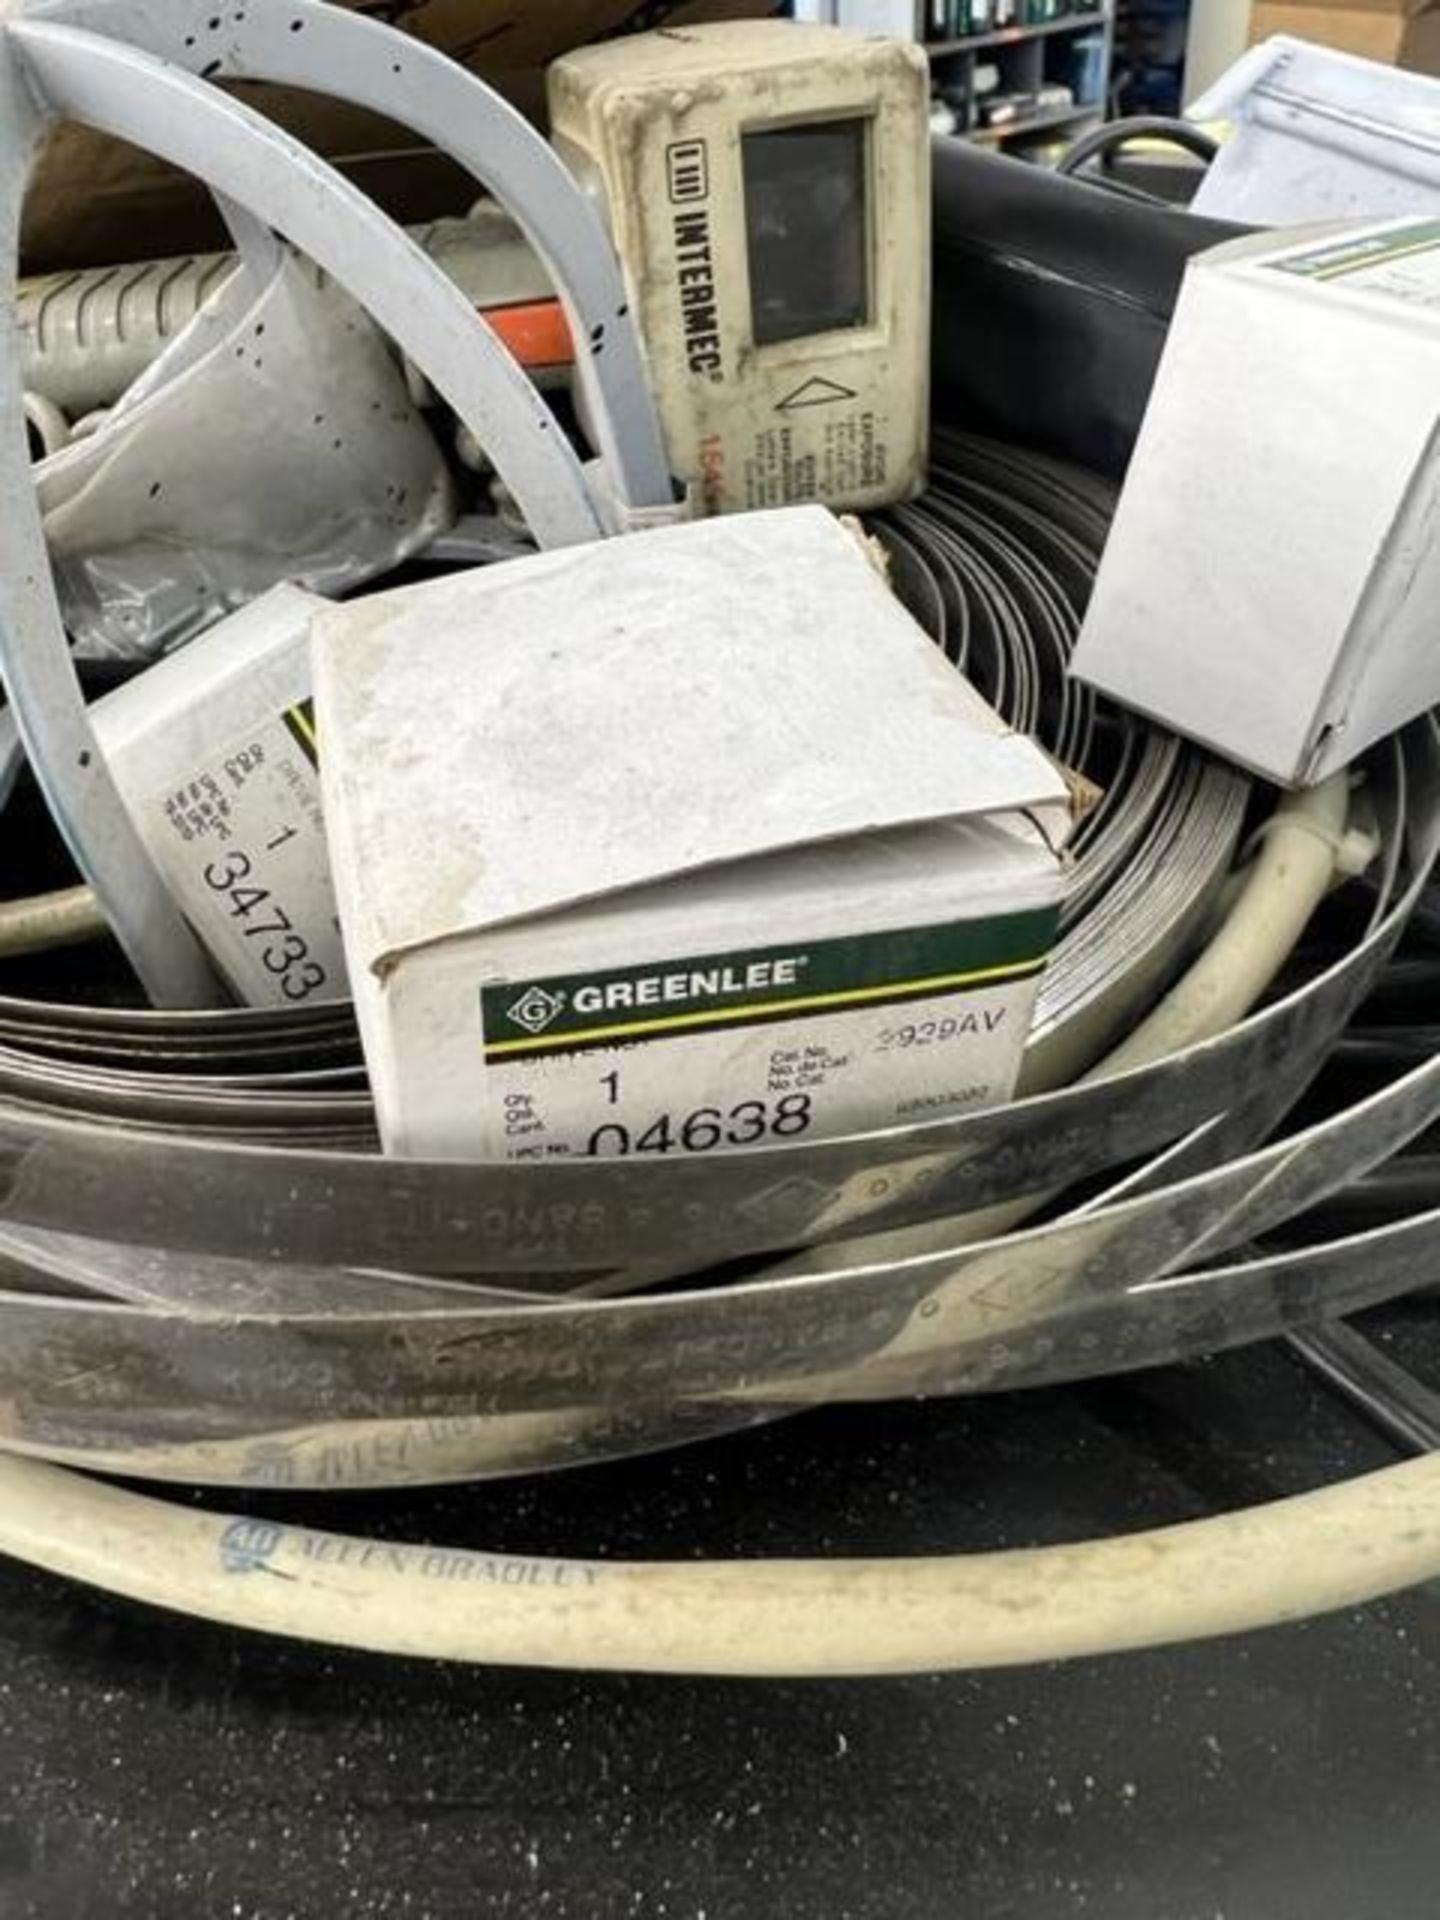 Gaylord Box w/ Assorted Parts Consisting of Oil Seals, Lights, Brushes, Scanners, Packing Kits, Modu - Image 20 of 21